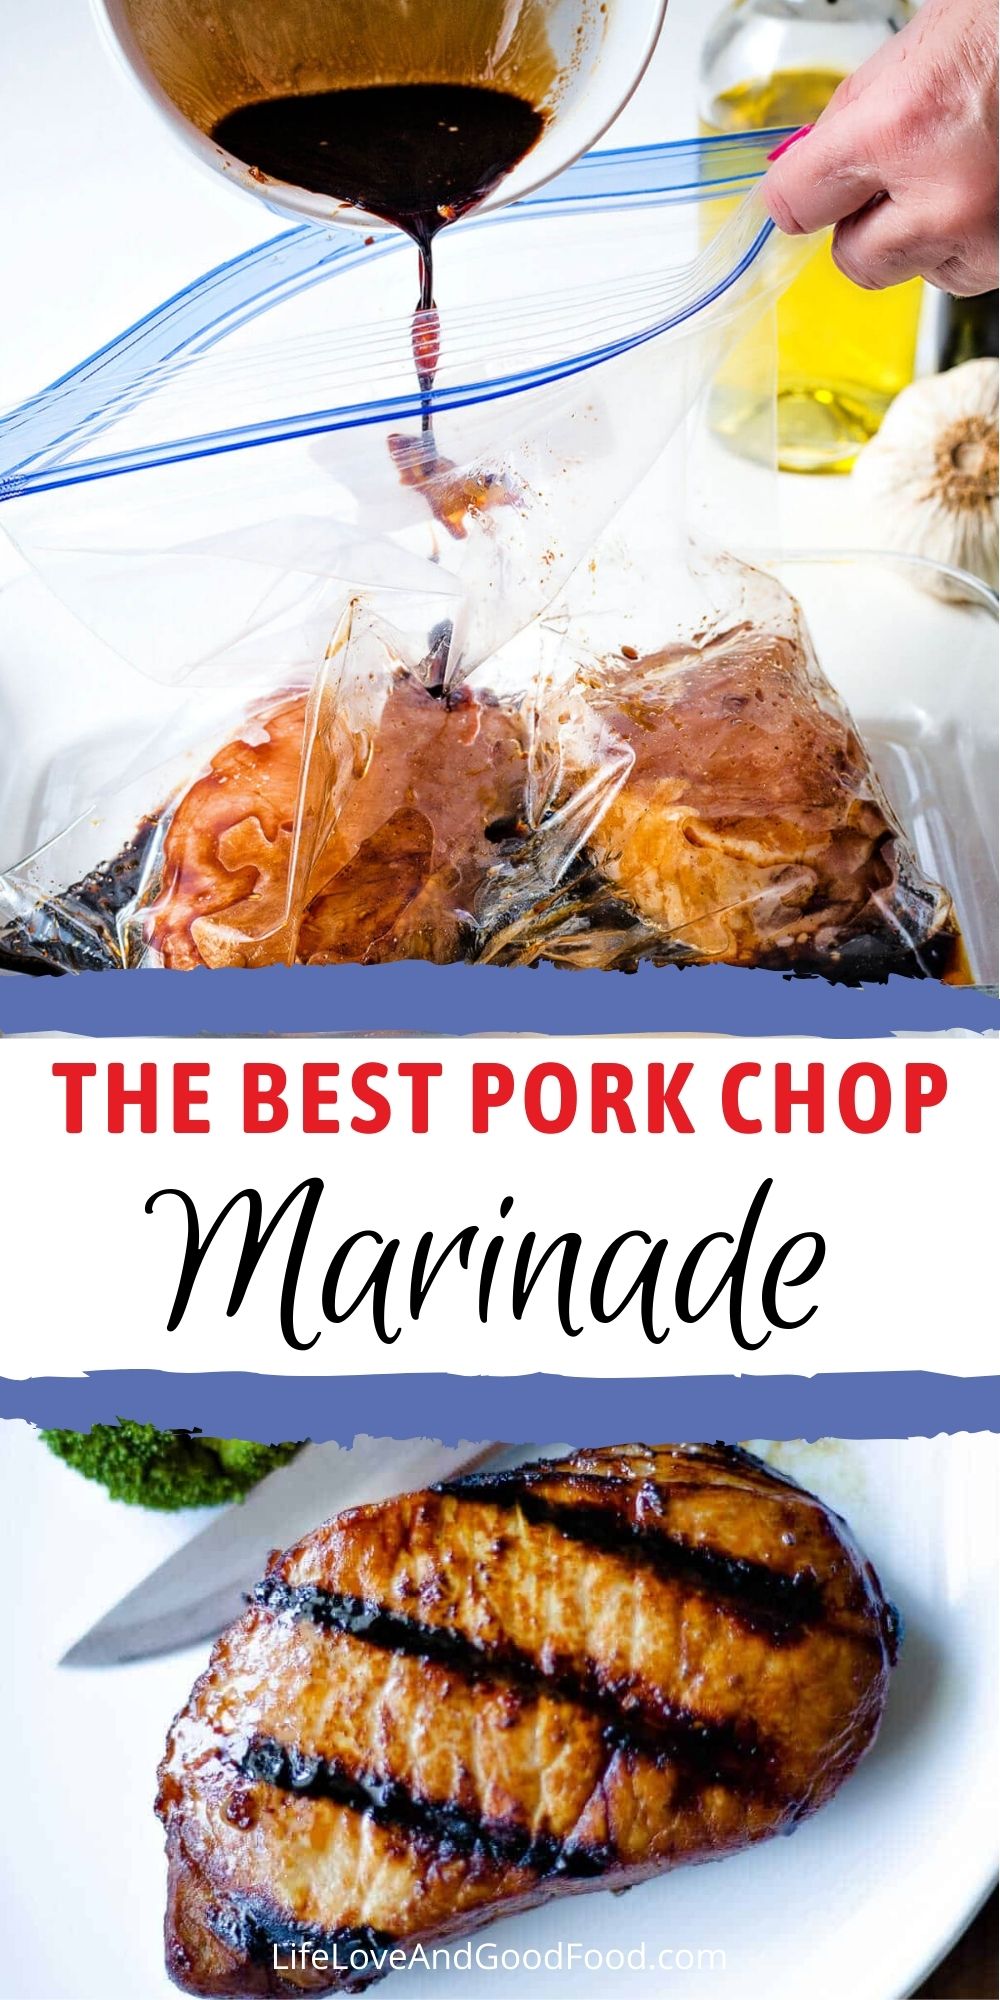 BEST Grilled Pork Chop Marinade - Life, Love, and Good Food